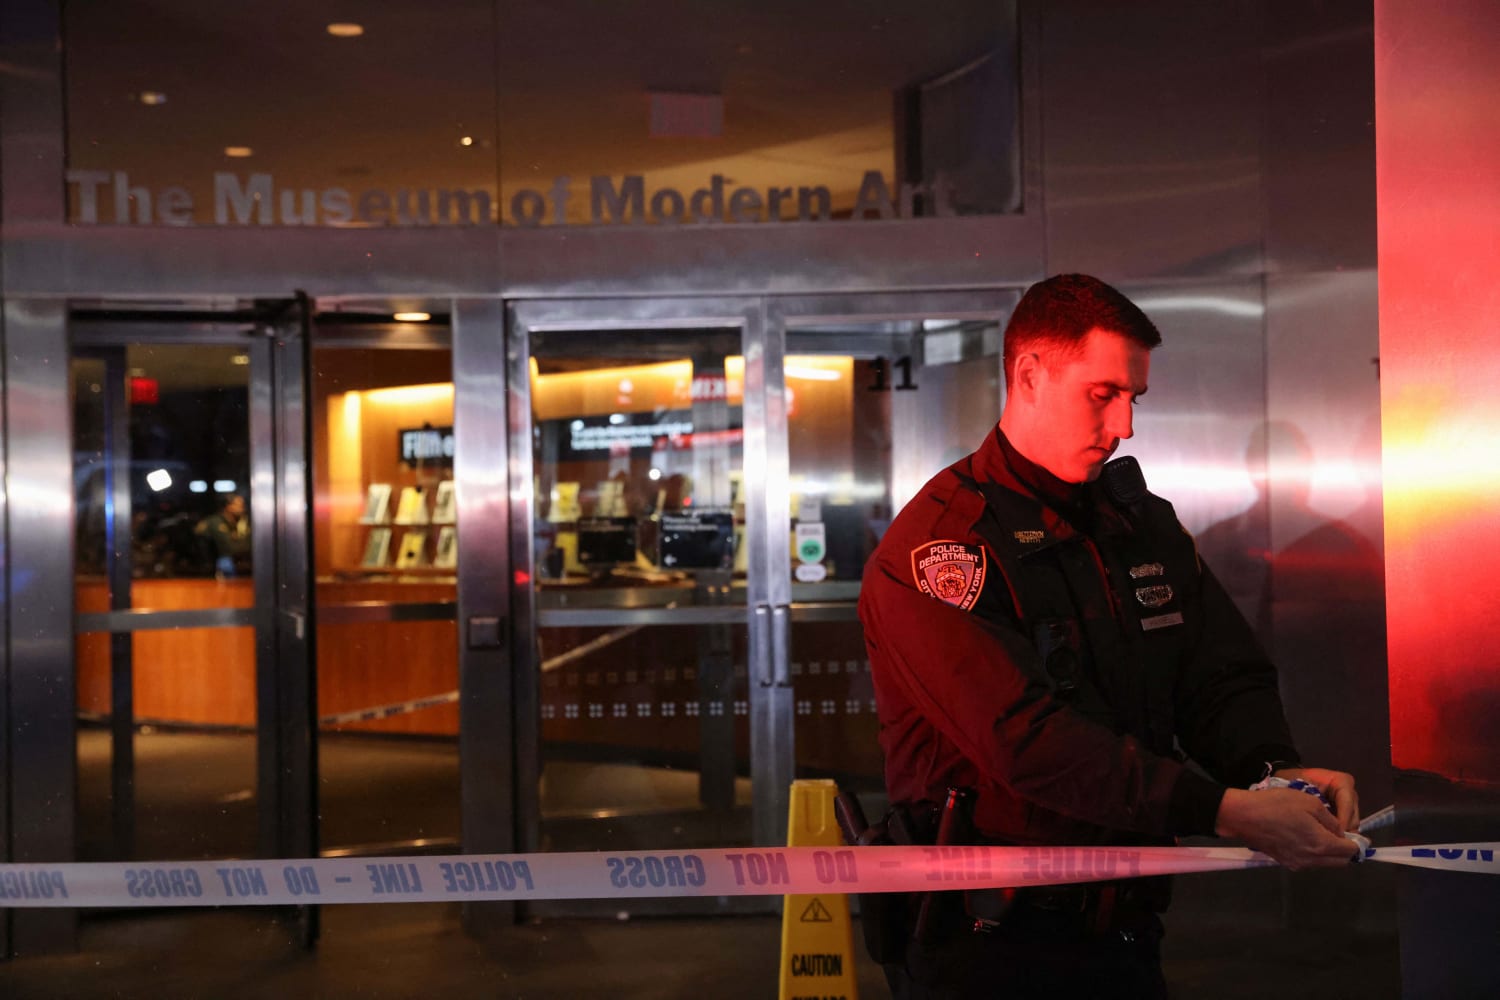 NYC museum stabbing suspect arrested in Philadelphia after hotel fire, police say